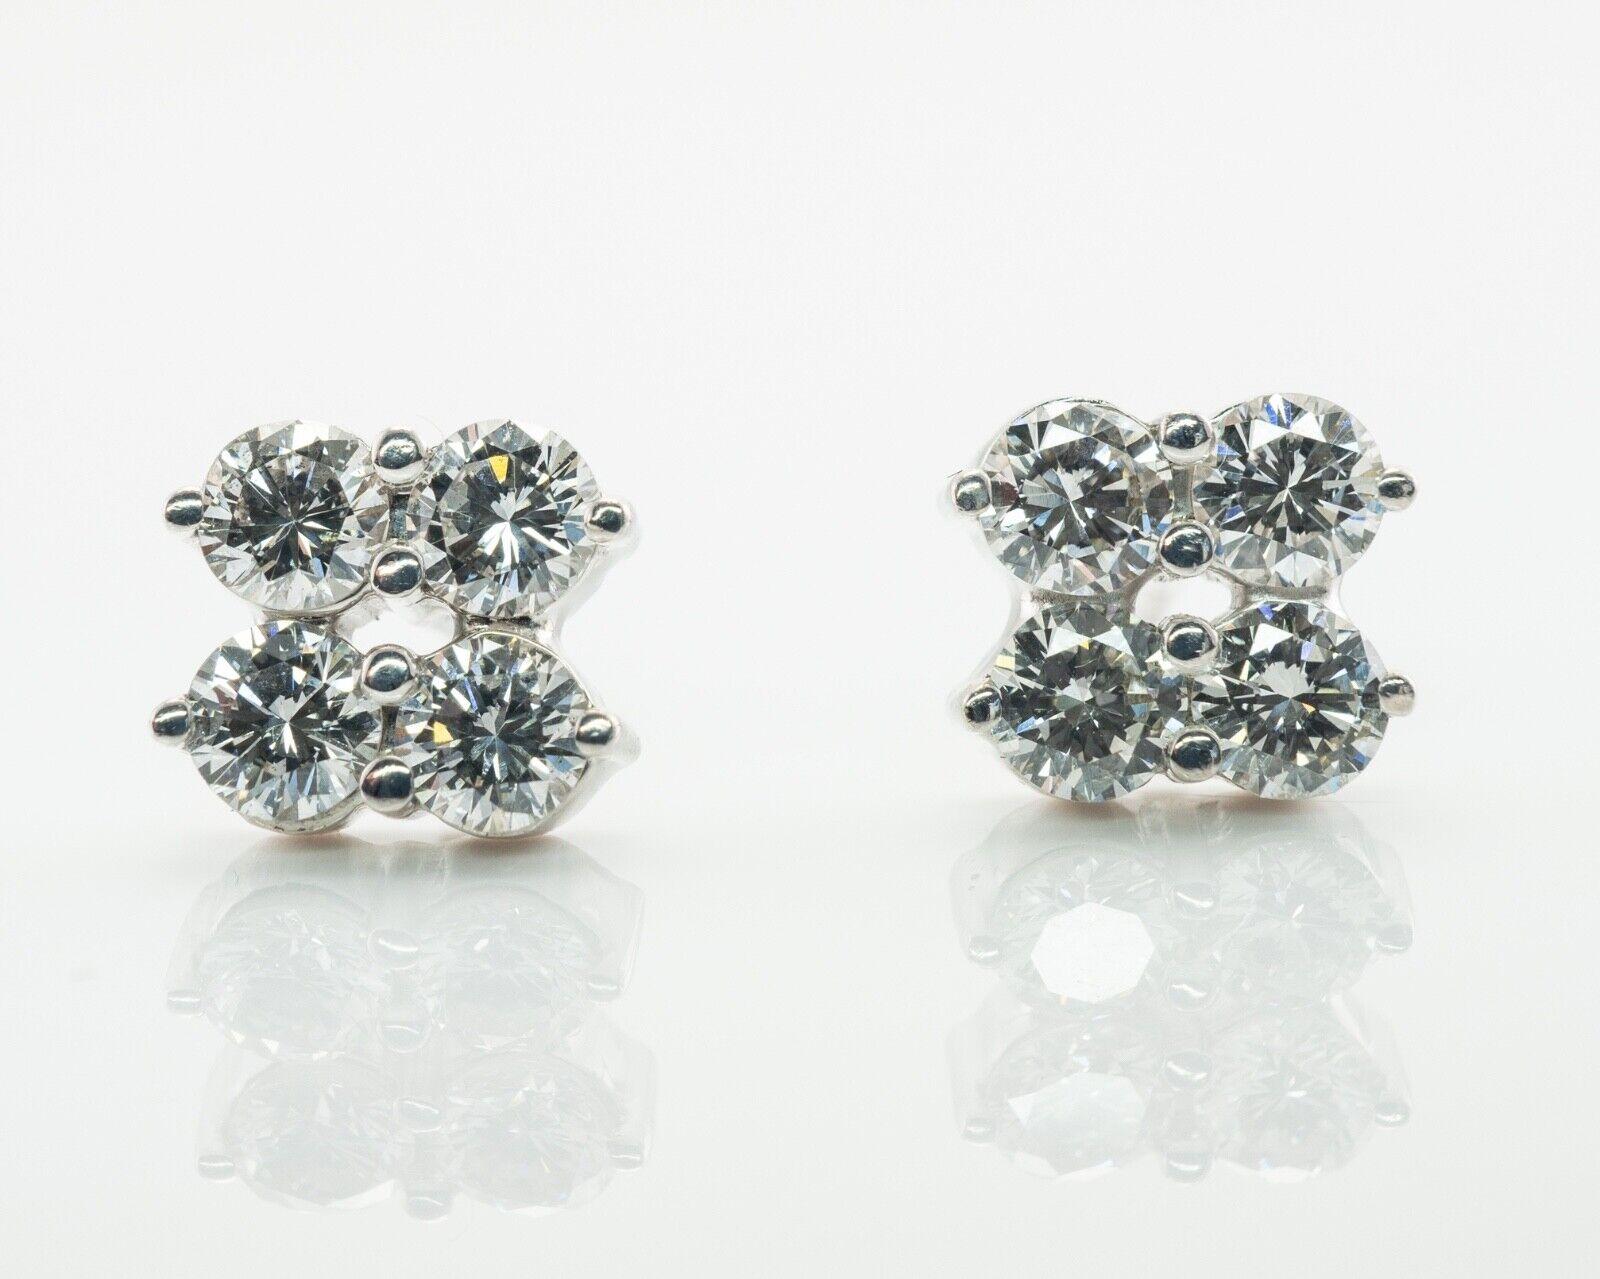 Diamond Stud Earrings 14K White Gold Vintage 1.20 TDW

These beautiful vintage solid 14K white gold stud earrings can be worn anytime, anywhere, and will make the most luxurious of gifts. These exquisite earrings feature four round brilliant cut